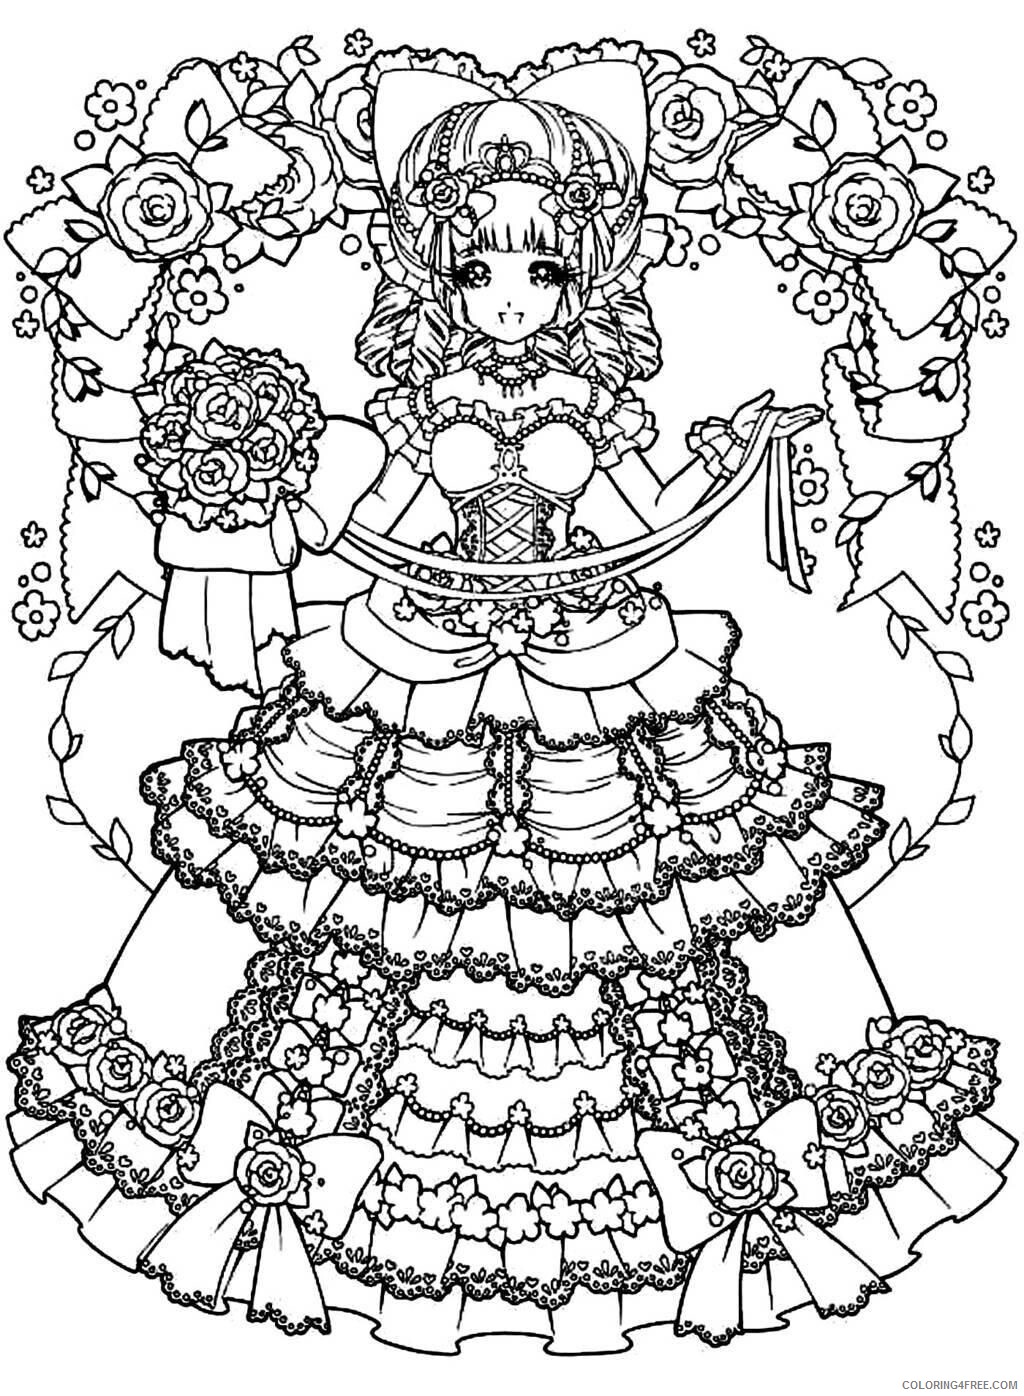 5 Beautiful Girls in a Gown Coloring Pages Print adult back to childhood 2021 09 Coloring4free